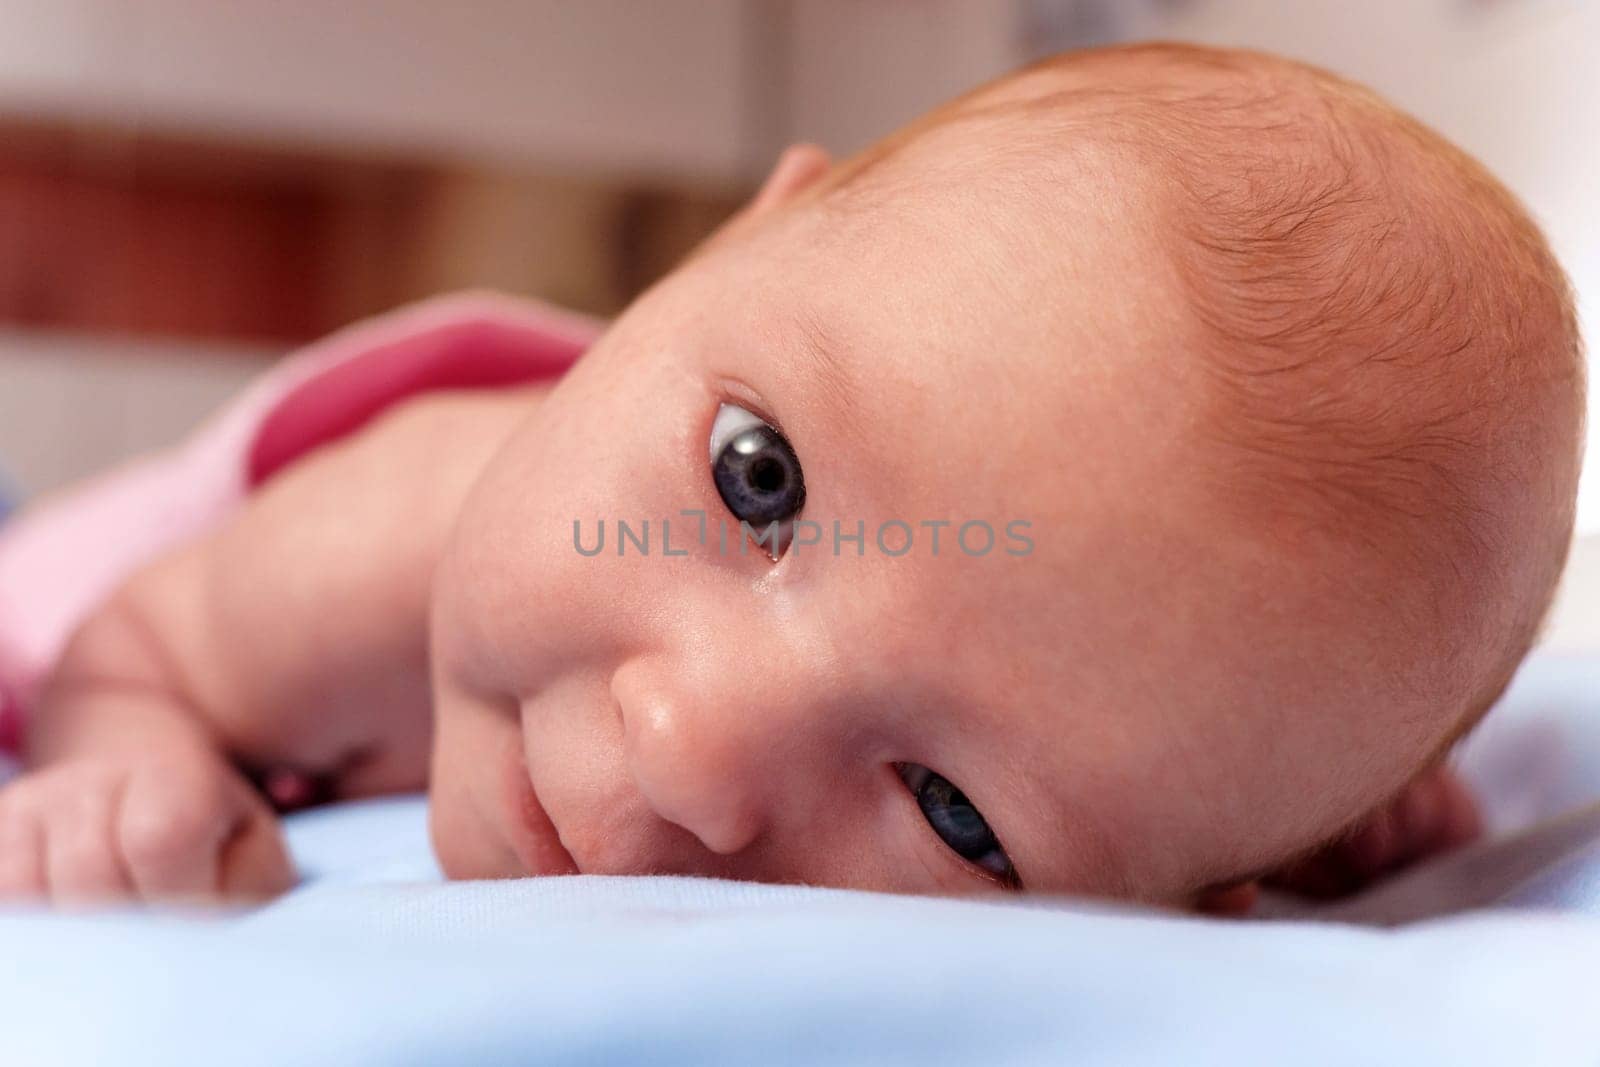 Newborn baby, at the tender age of two months, lies comfortably while curiously looking at the world around with bright, expressive eyes. by darksoul72